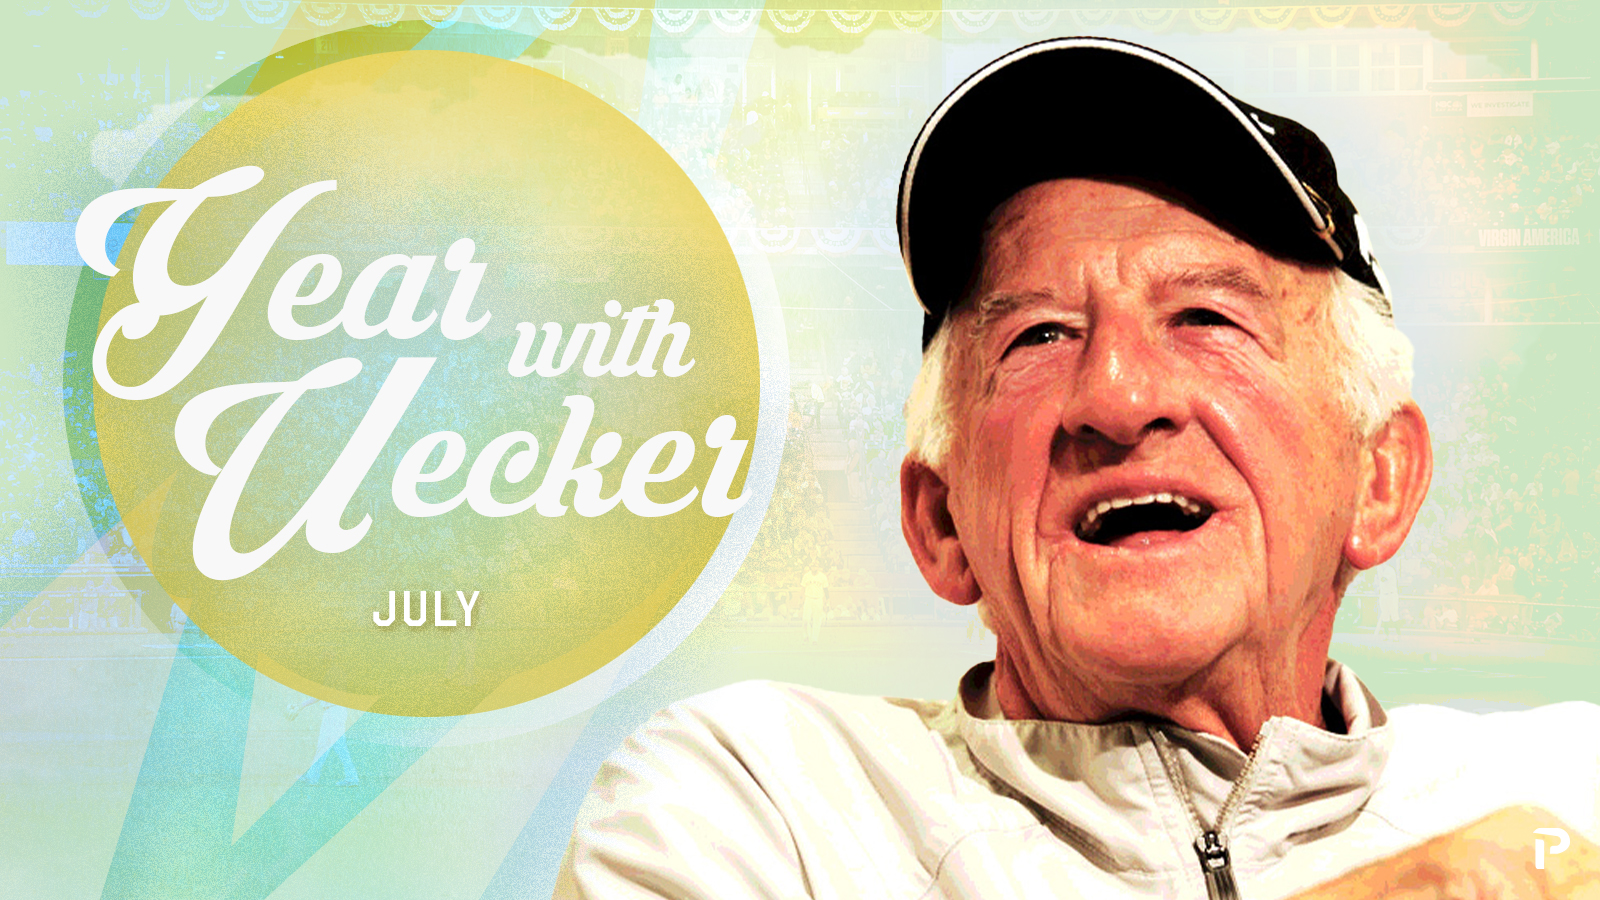 Year with Uecker: July